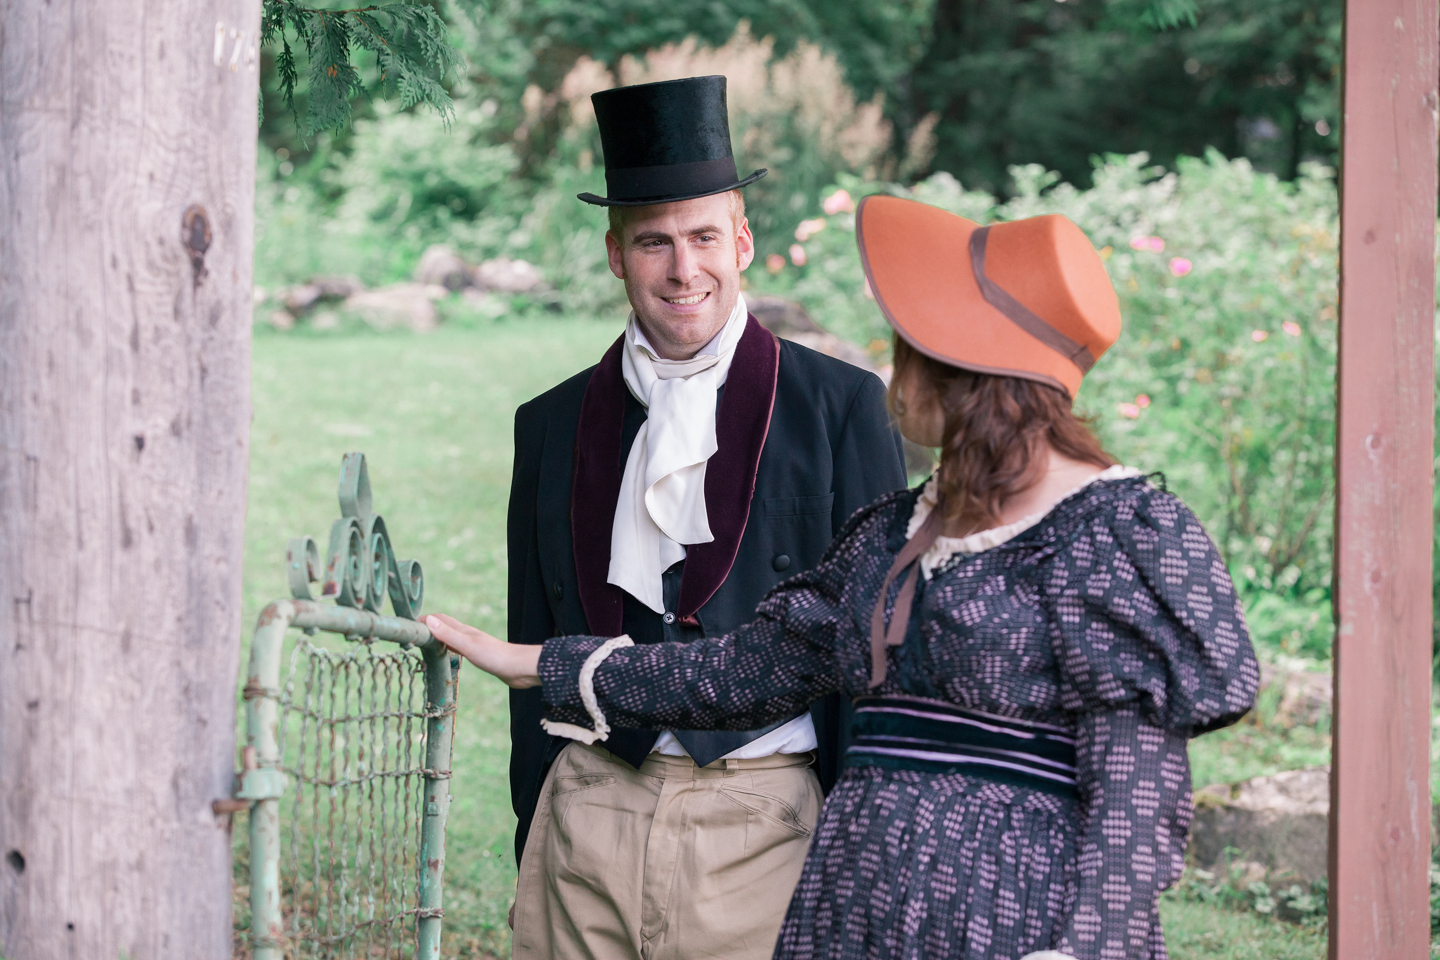 P&P pride and Prejudice themed engagement photos costumes